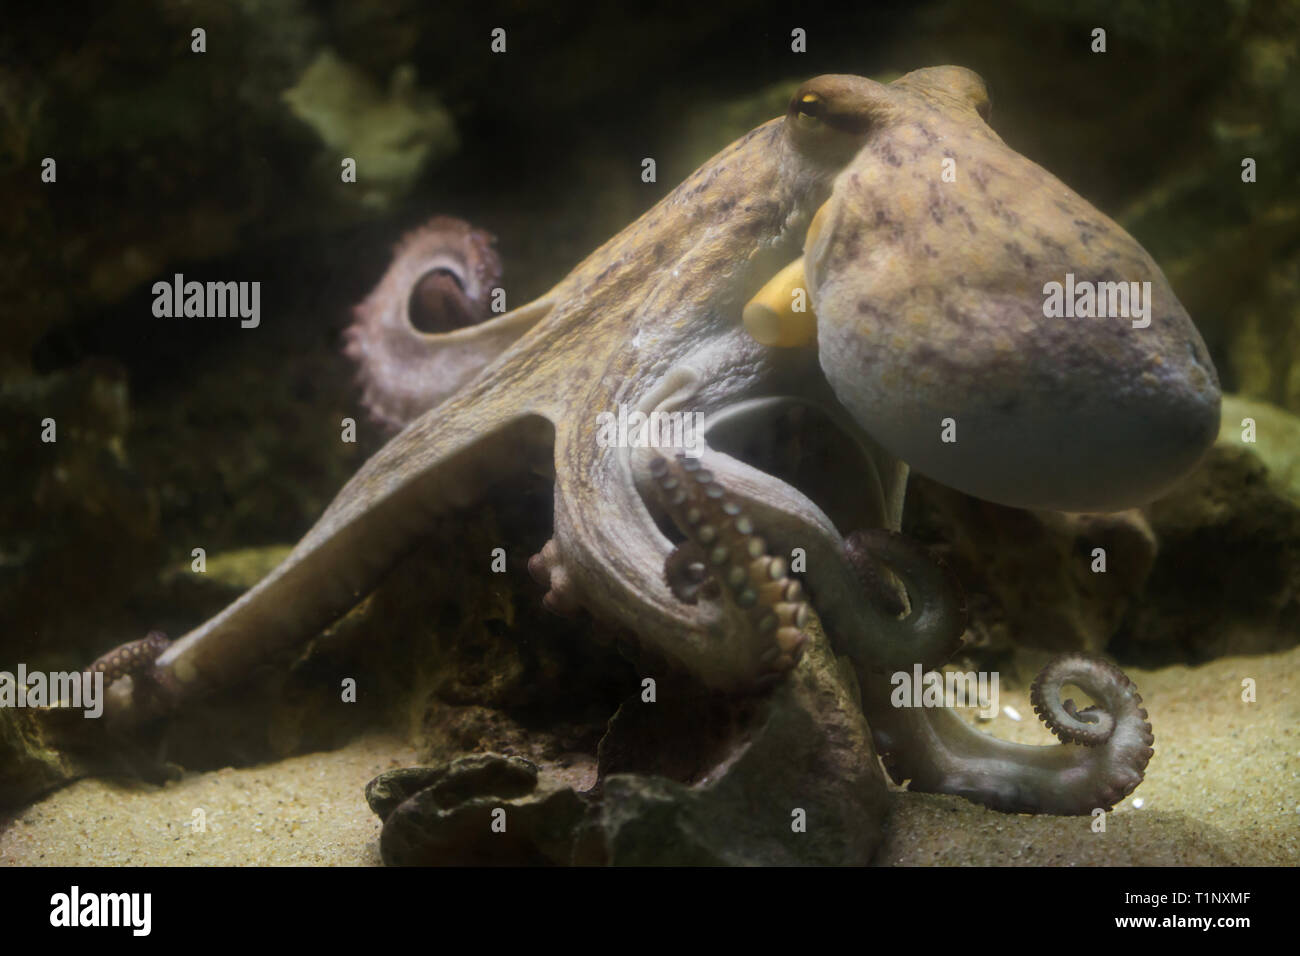 Common octopus (Octopus vulgaris), also known as the octopus. Stock Photo